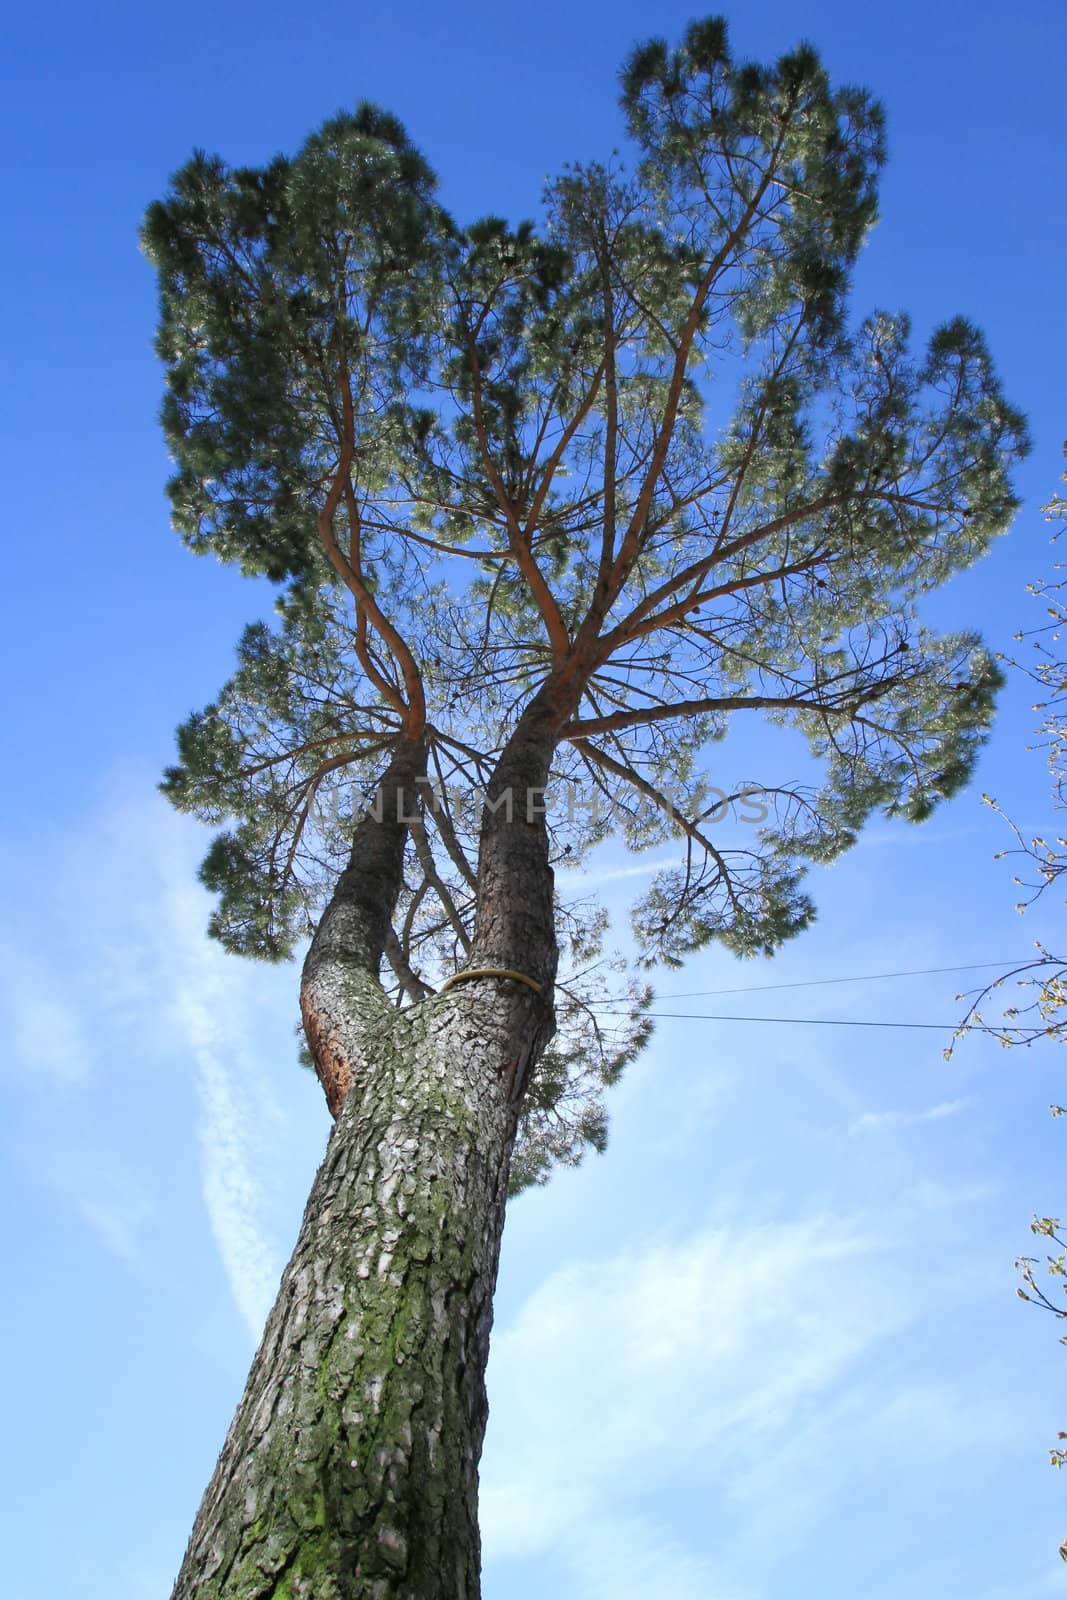 Umbrella pine picture from above and blue sky, typical in south Europe